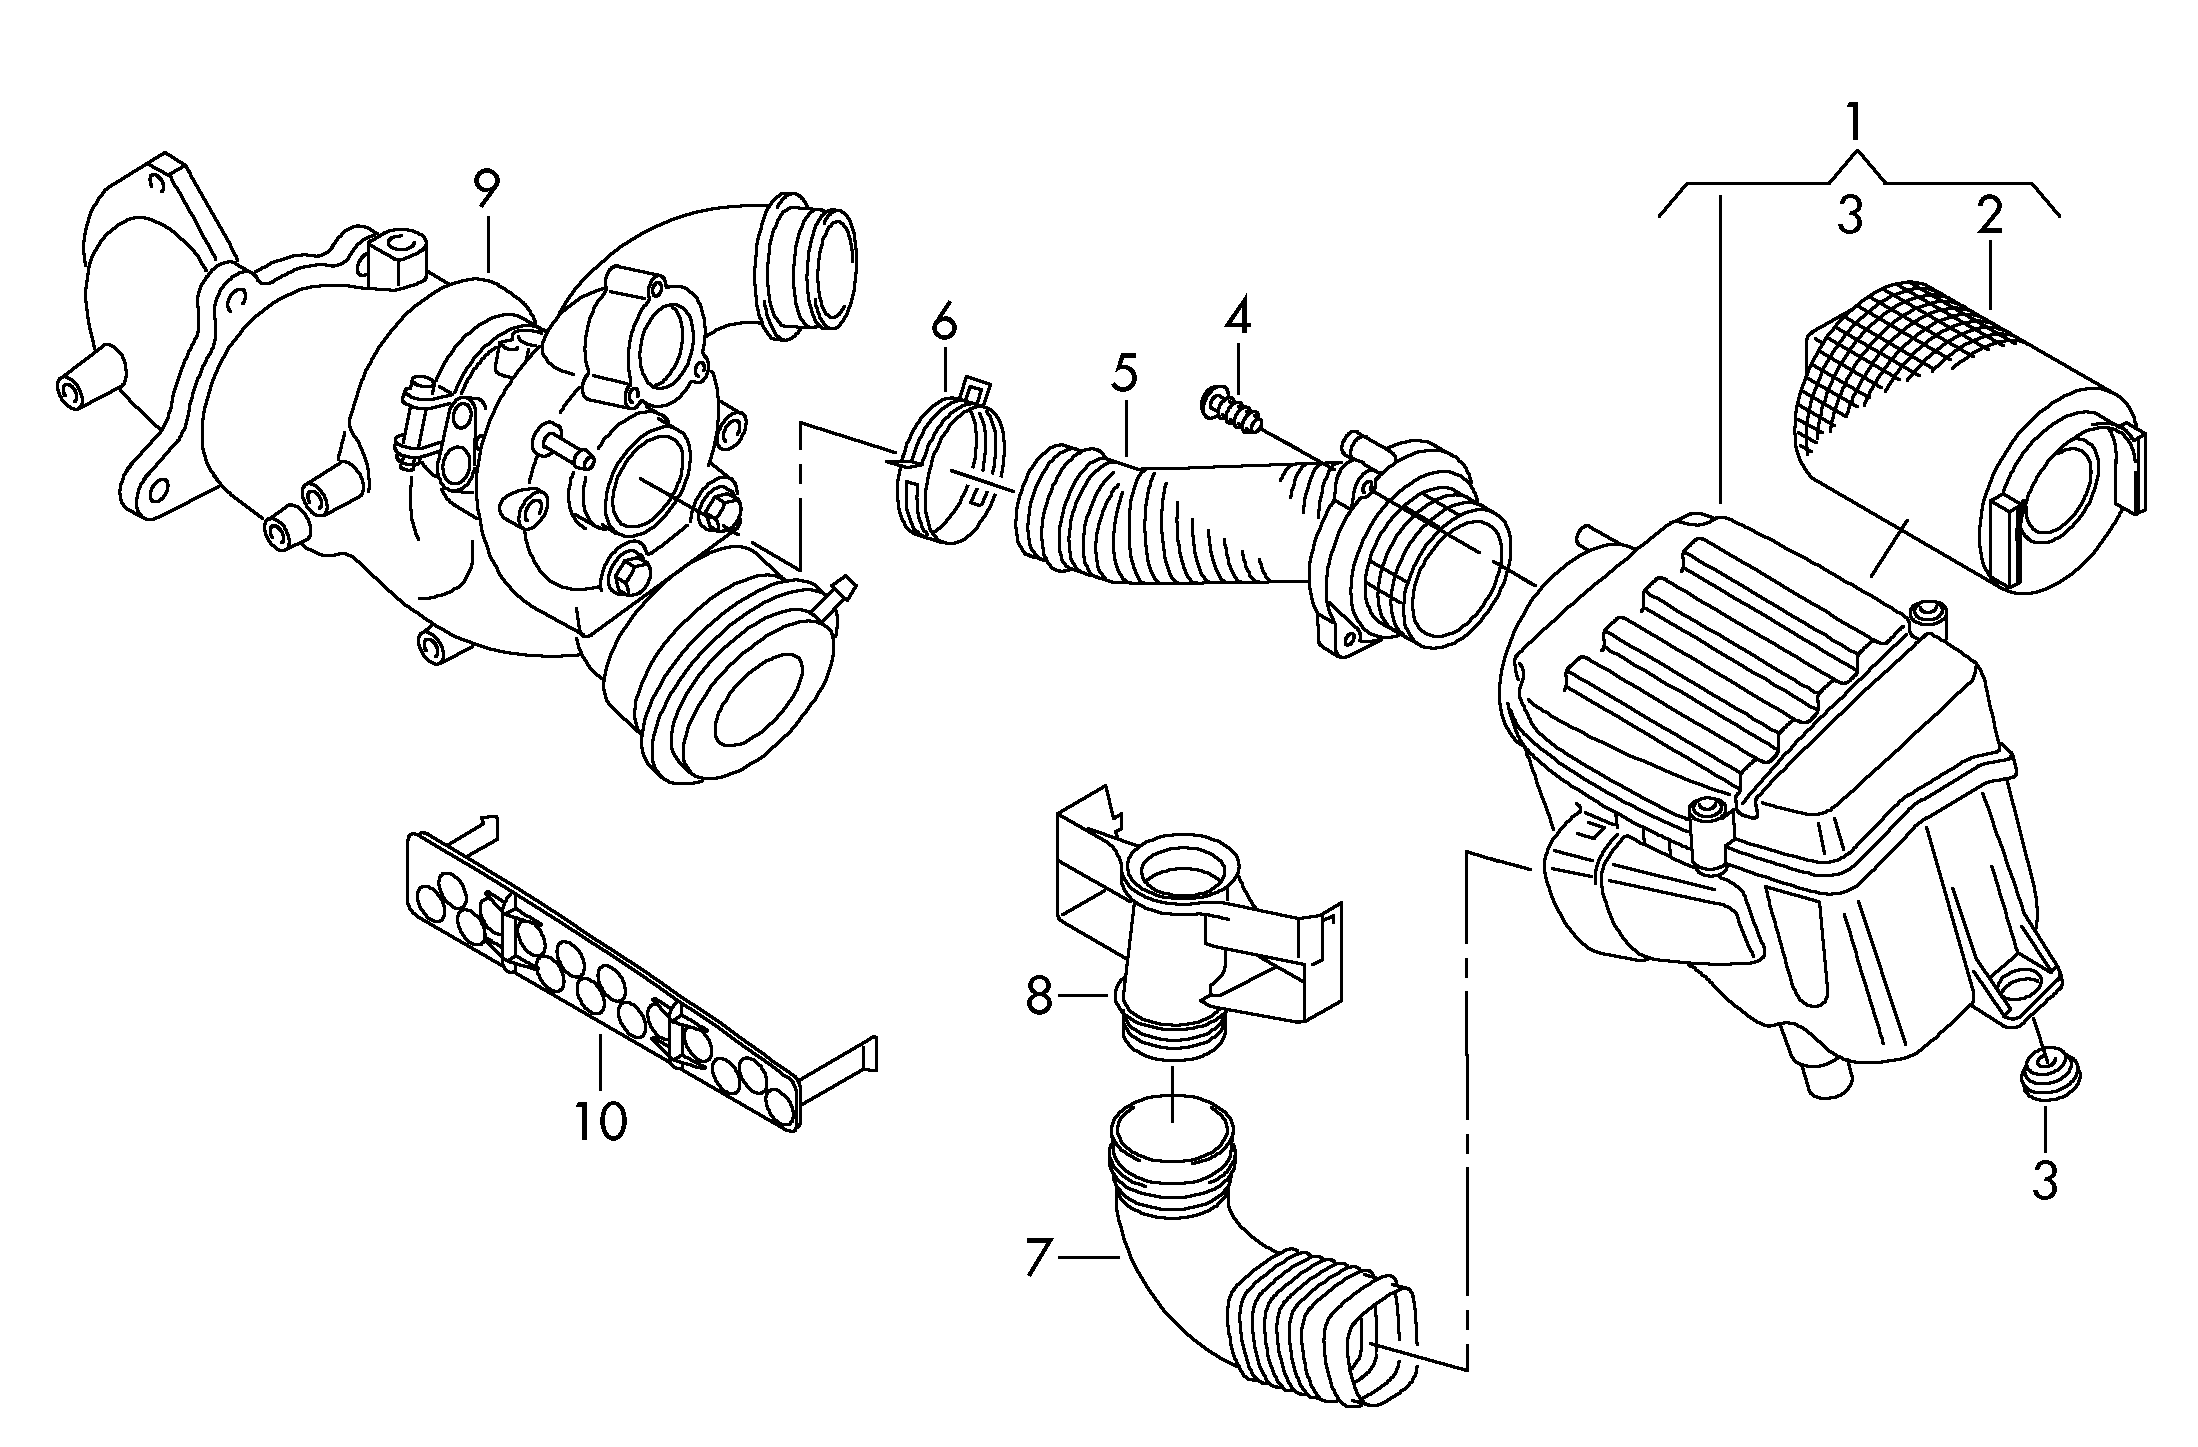 Air filter with connecting<br>parts 1.4ltr. - Jetta - je